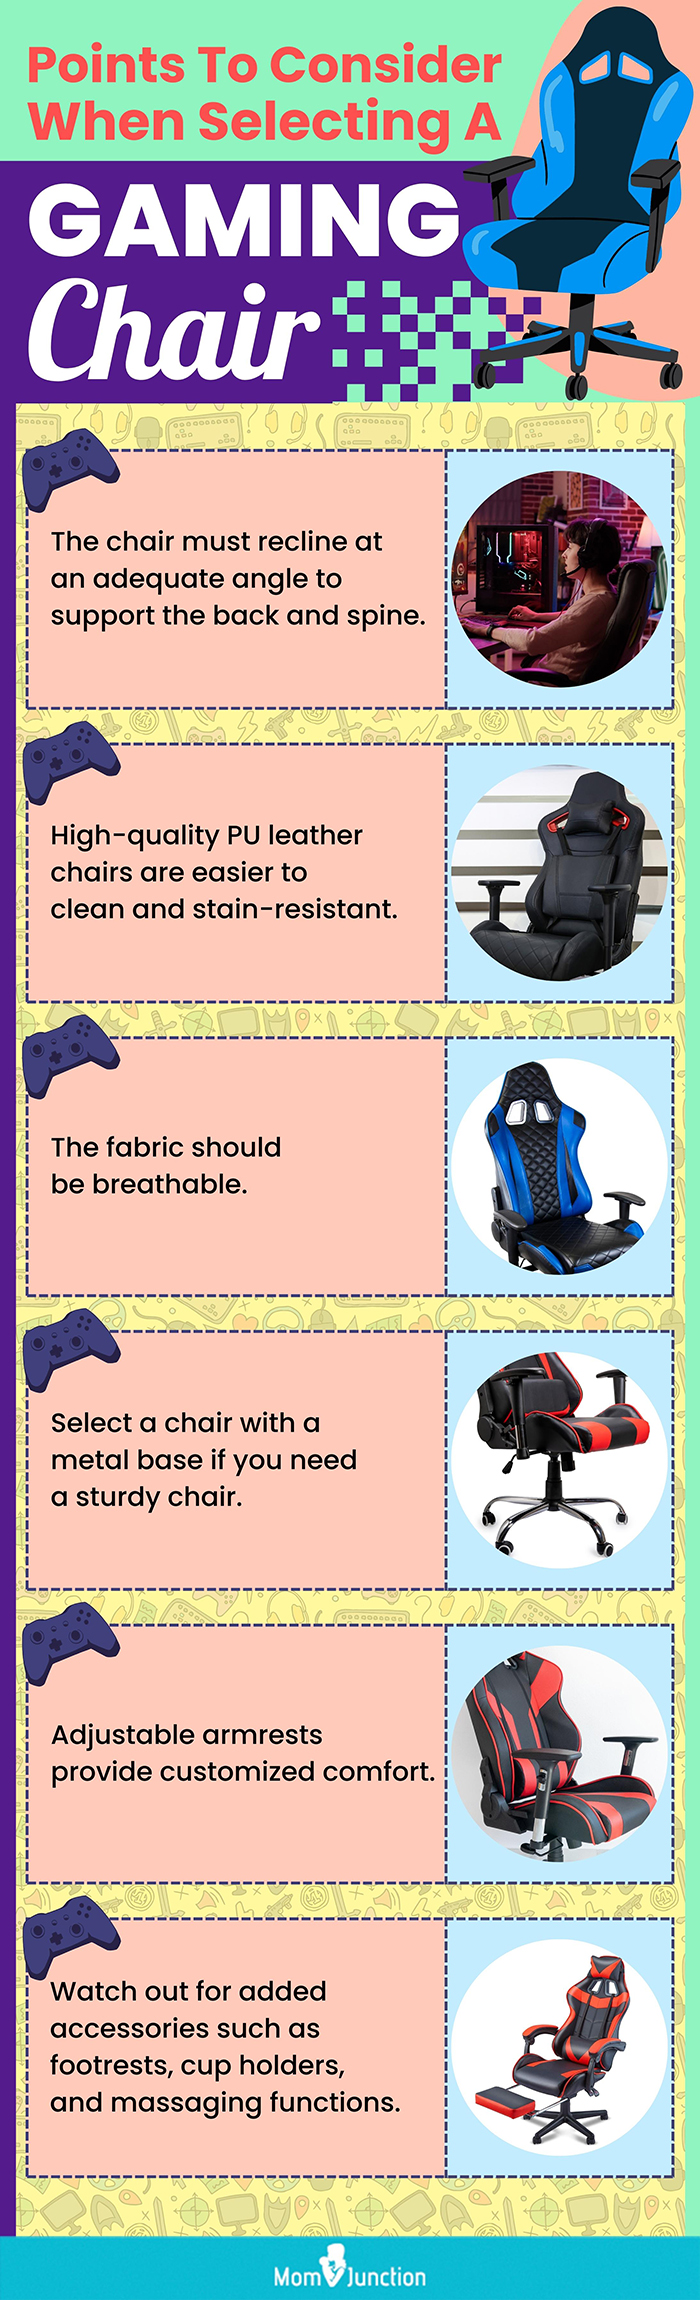 Points To Consider When Selecting A Gaming Chair